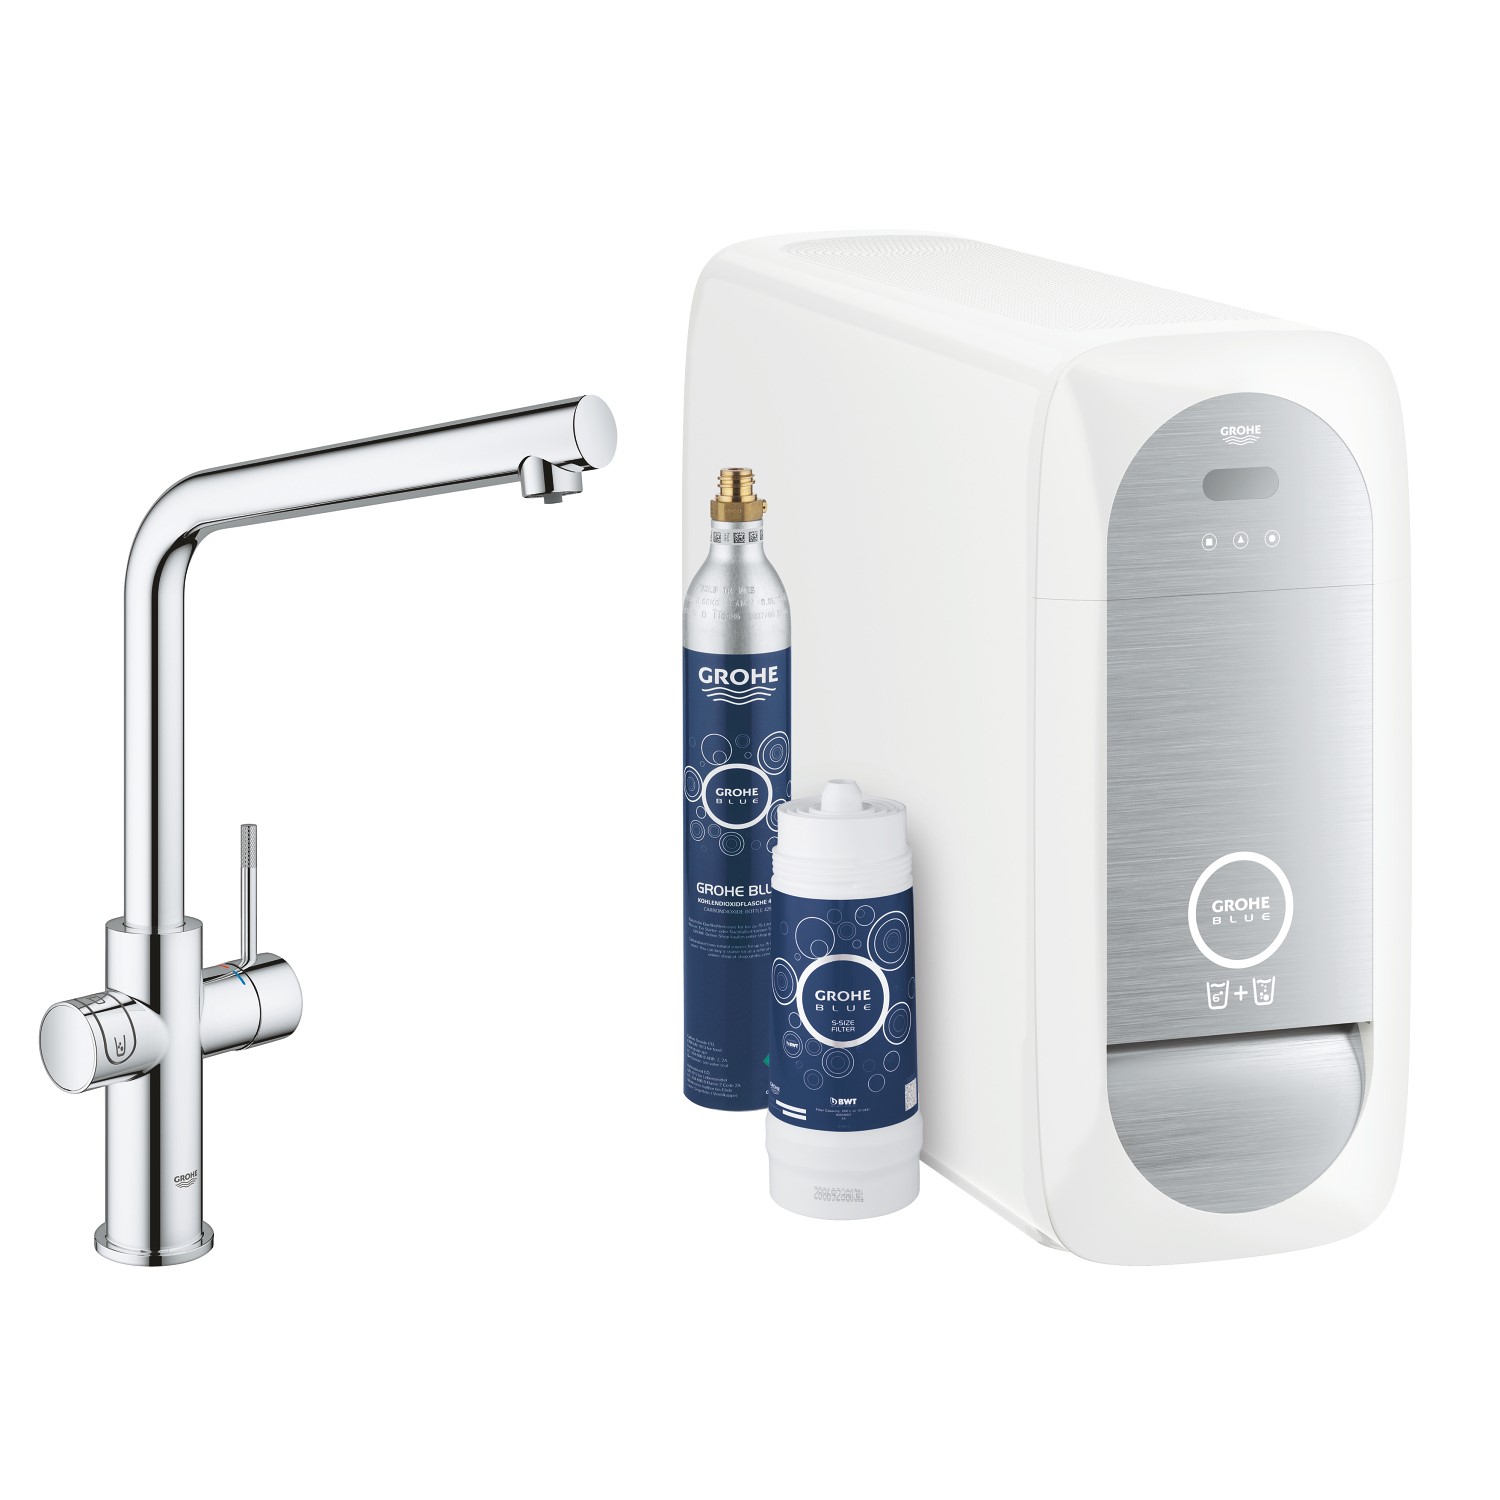 Grohe Chrome Blue Home L-Spout Single Lever Home Duo Starter Kitchen Tap Kit